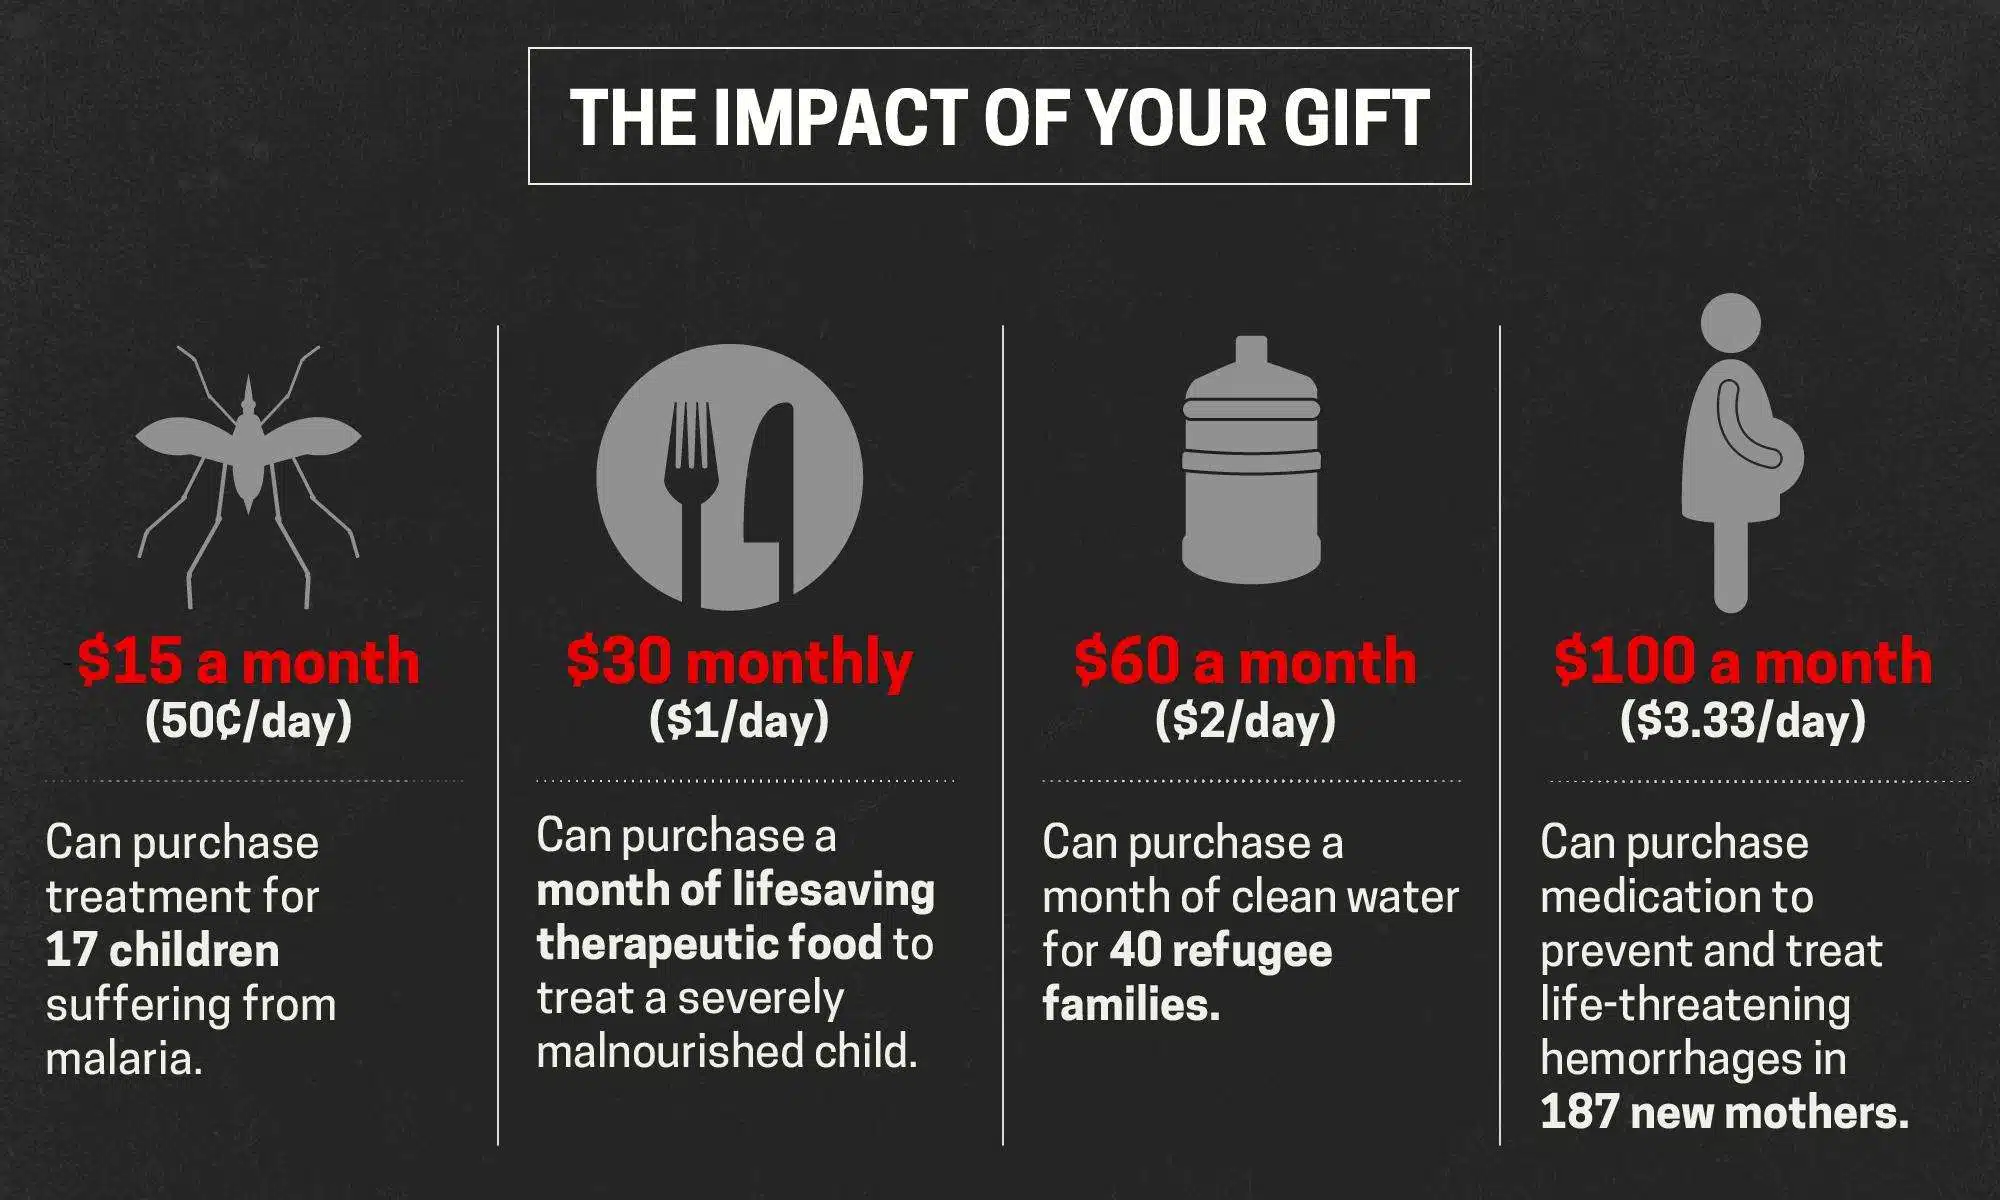 This graphic succinctly explains the impact of the Doctors Without Borders monthly giving program.